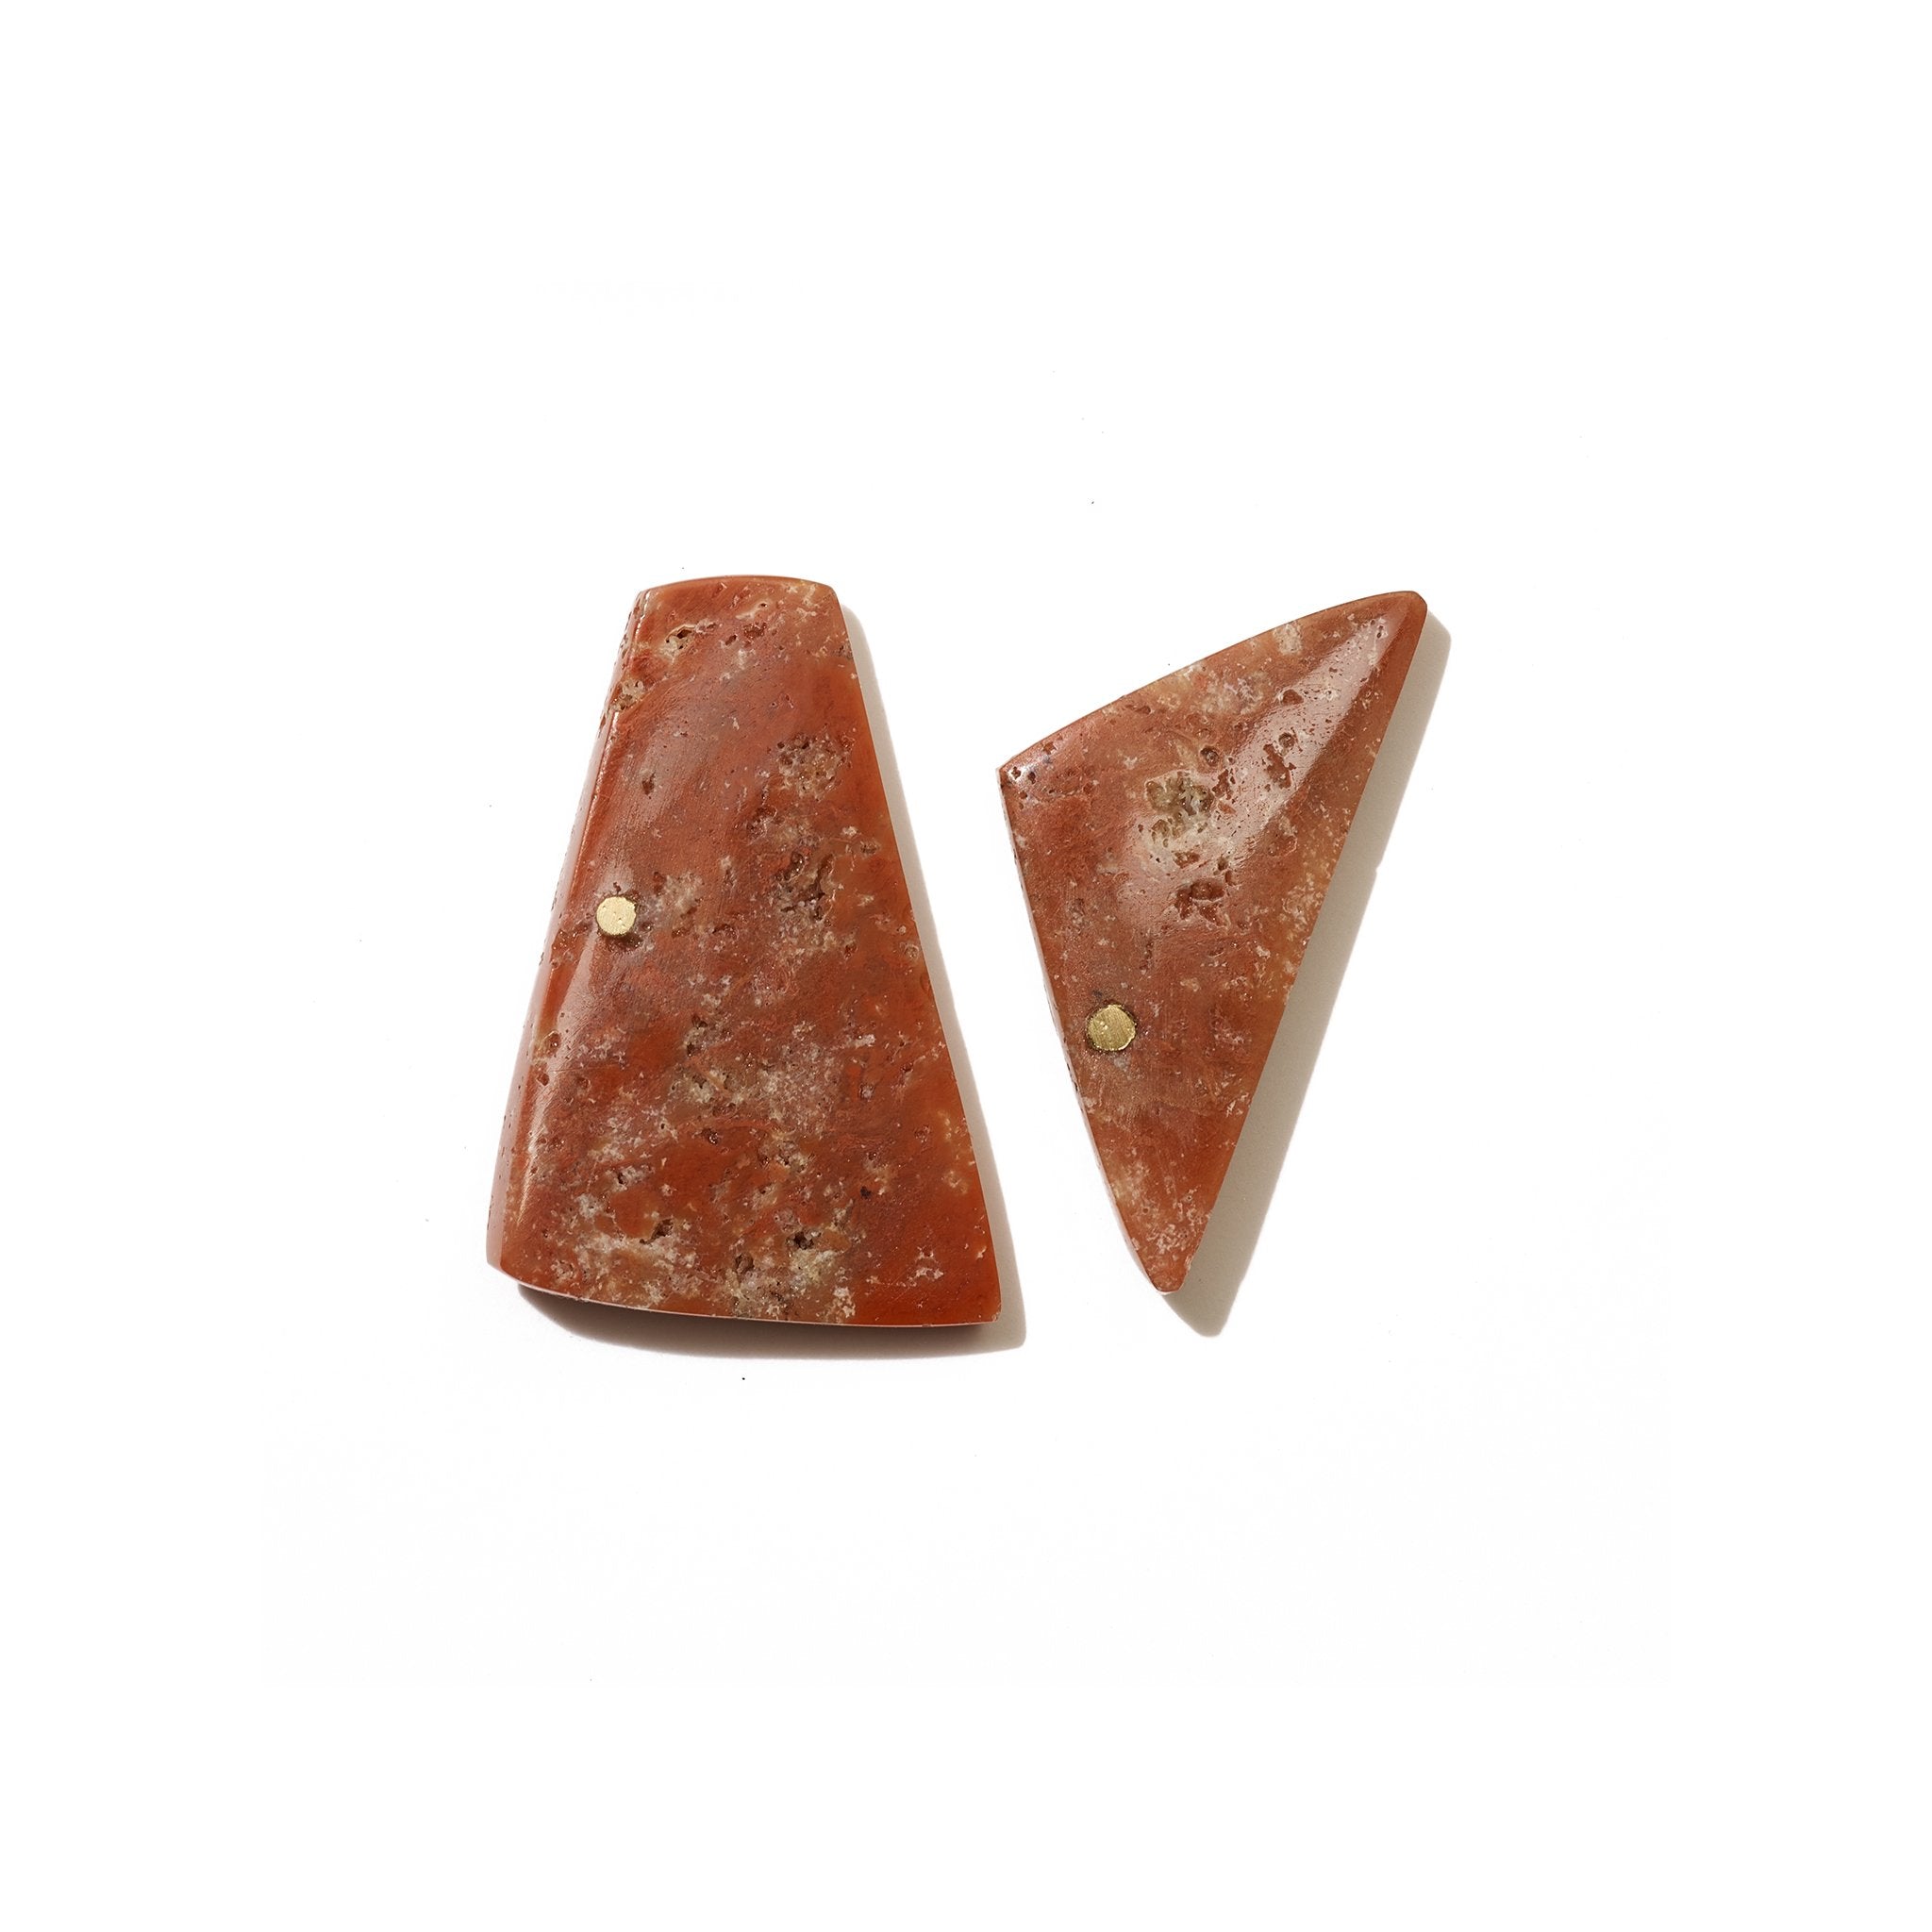 Modern and asymmetric stud earrings inspired by the work of Ellsworth Kelly and handcrafted from upcycled brass and ethically-sourced red jasper stones.